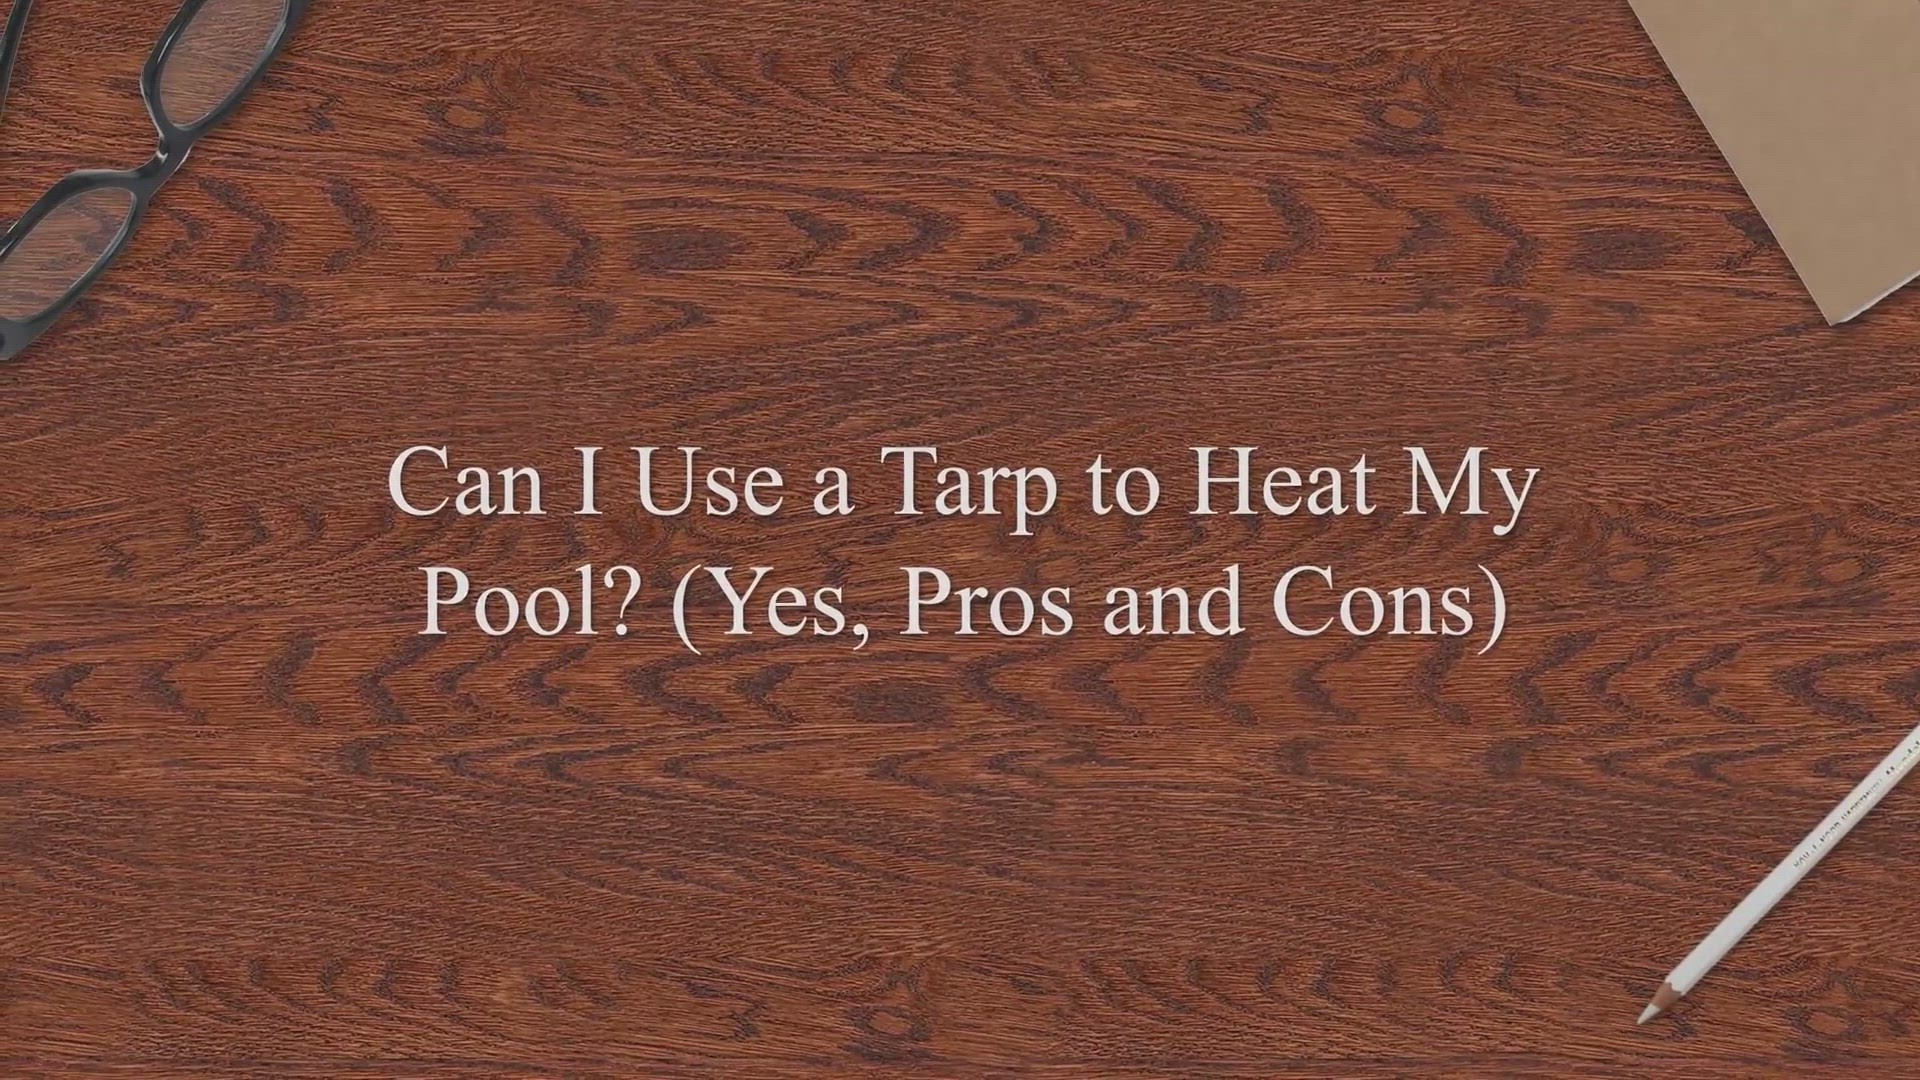 'Video thumbnail for Can I Use a Tarp to Heat My Pool? (Yes, Pros & Cons)'